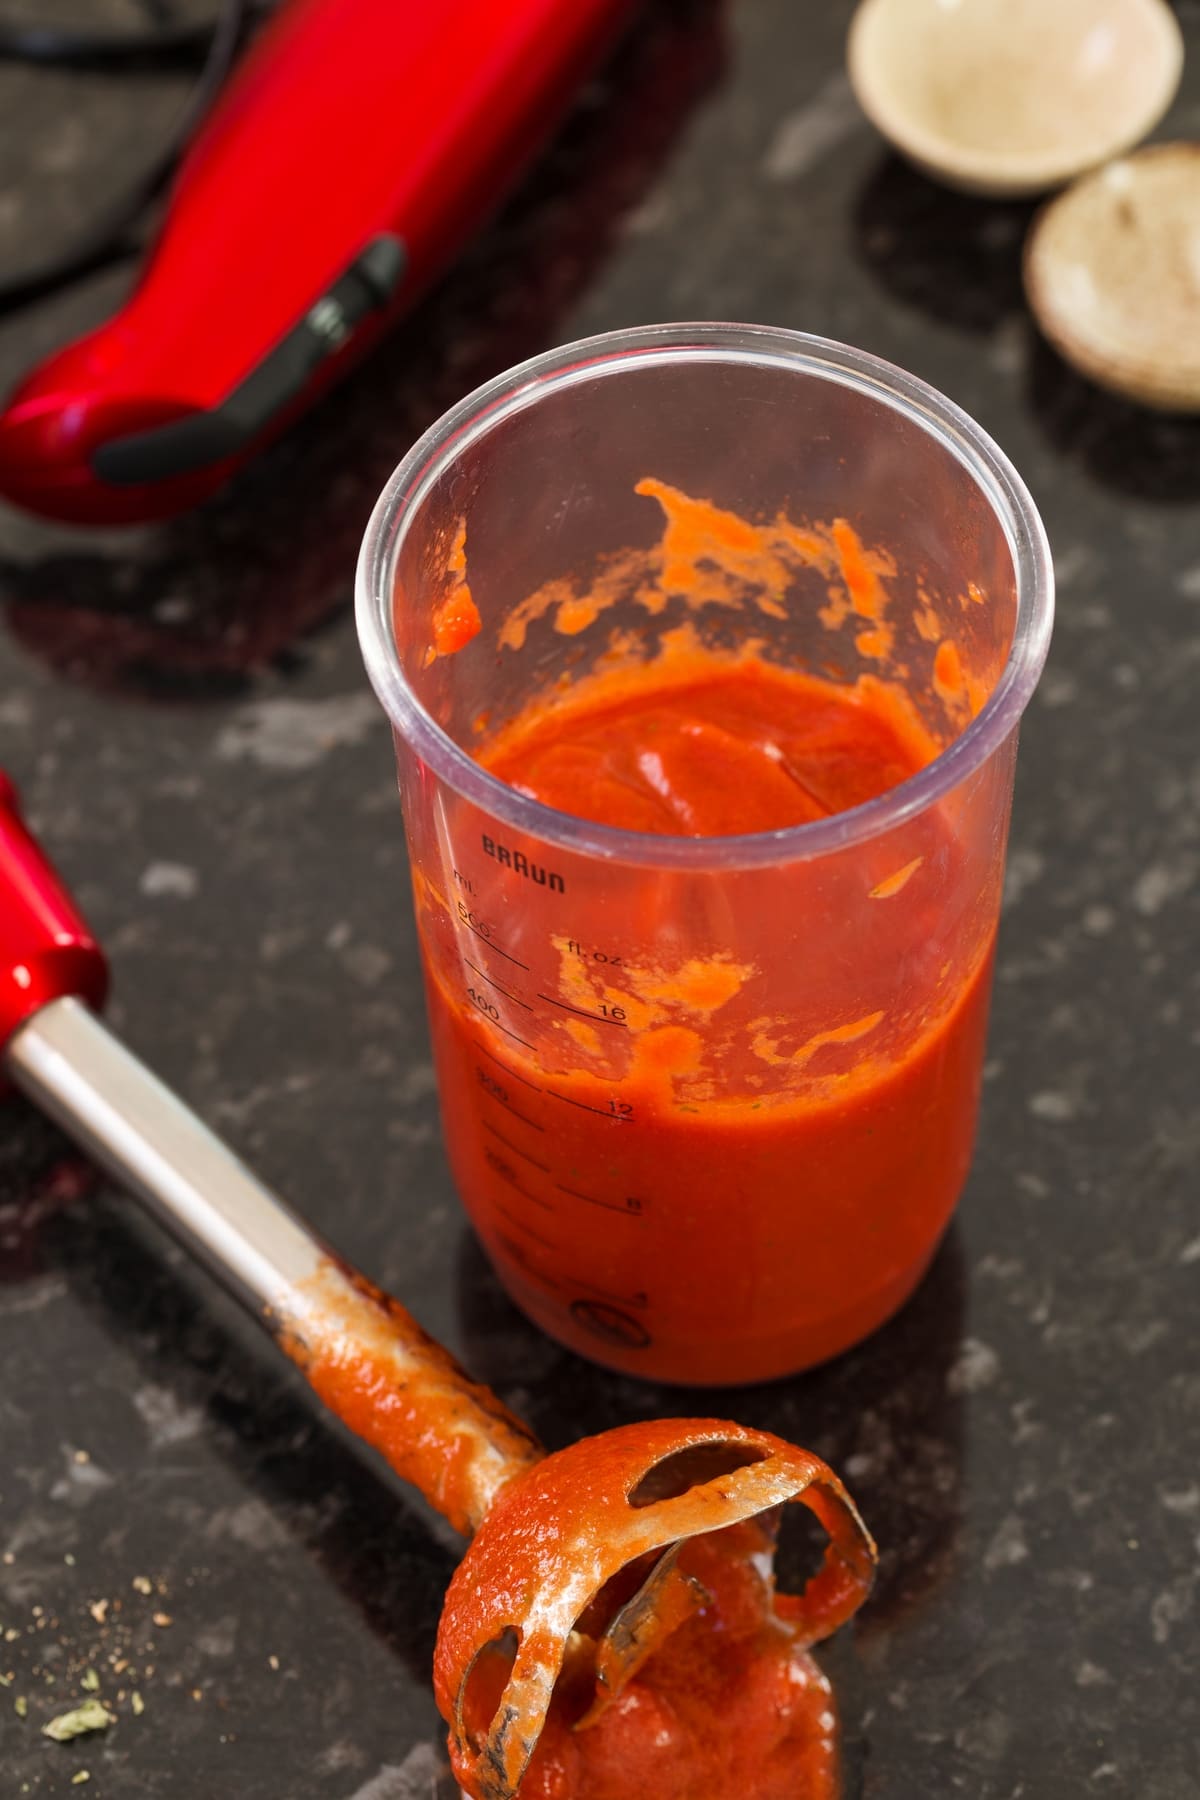 Mixing tomato sauce and condiments with an immersion blender.